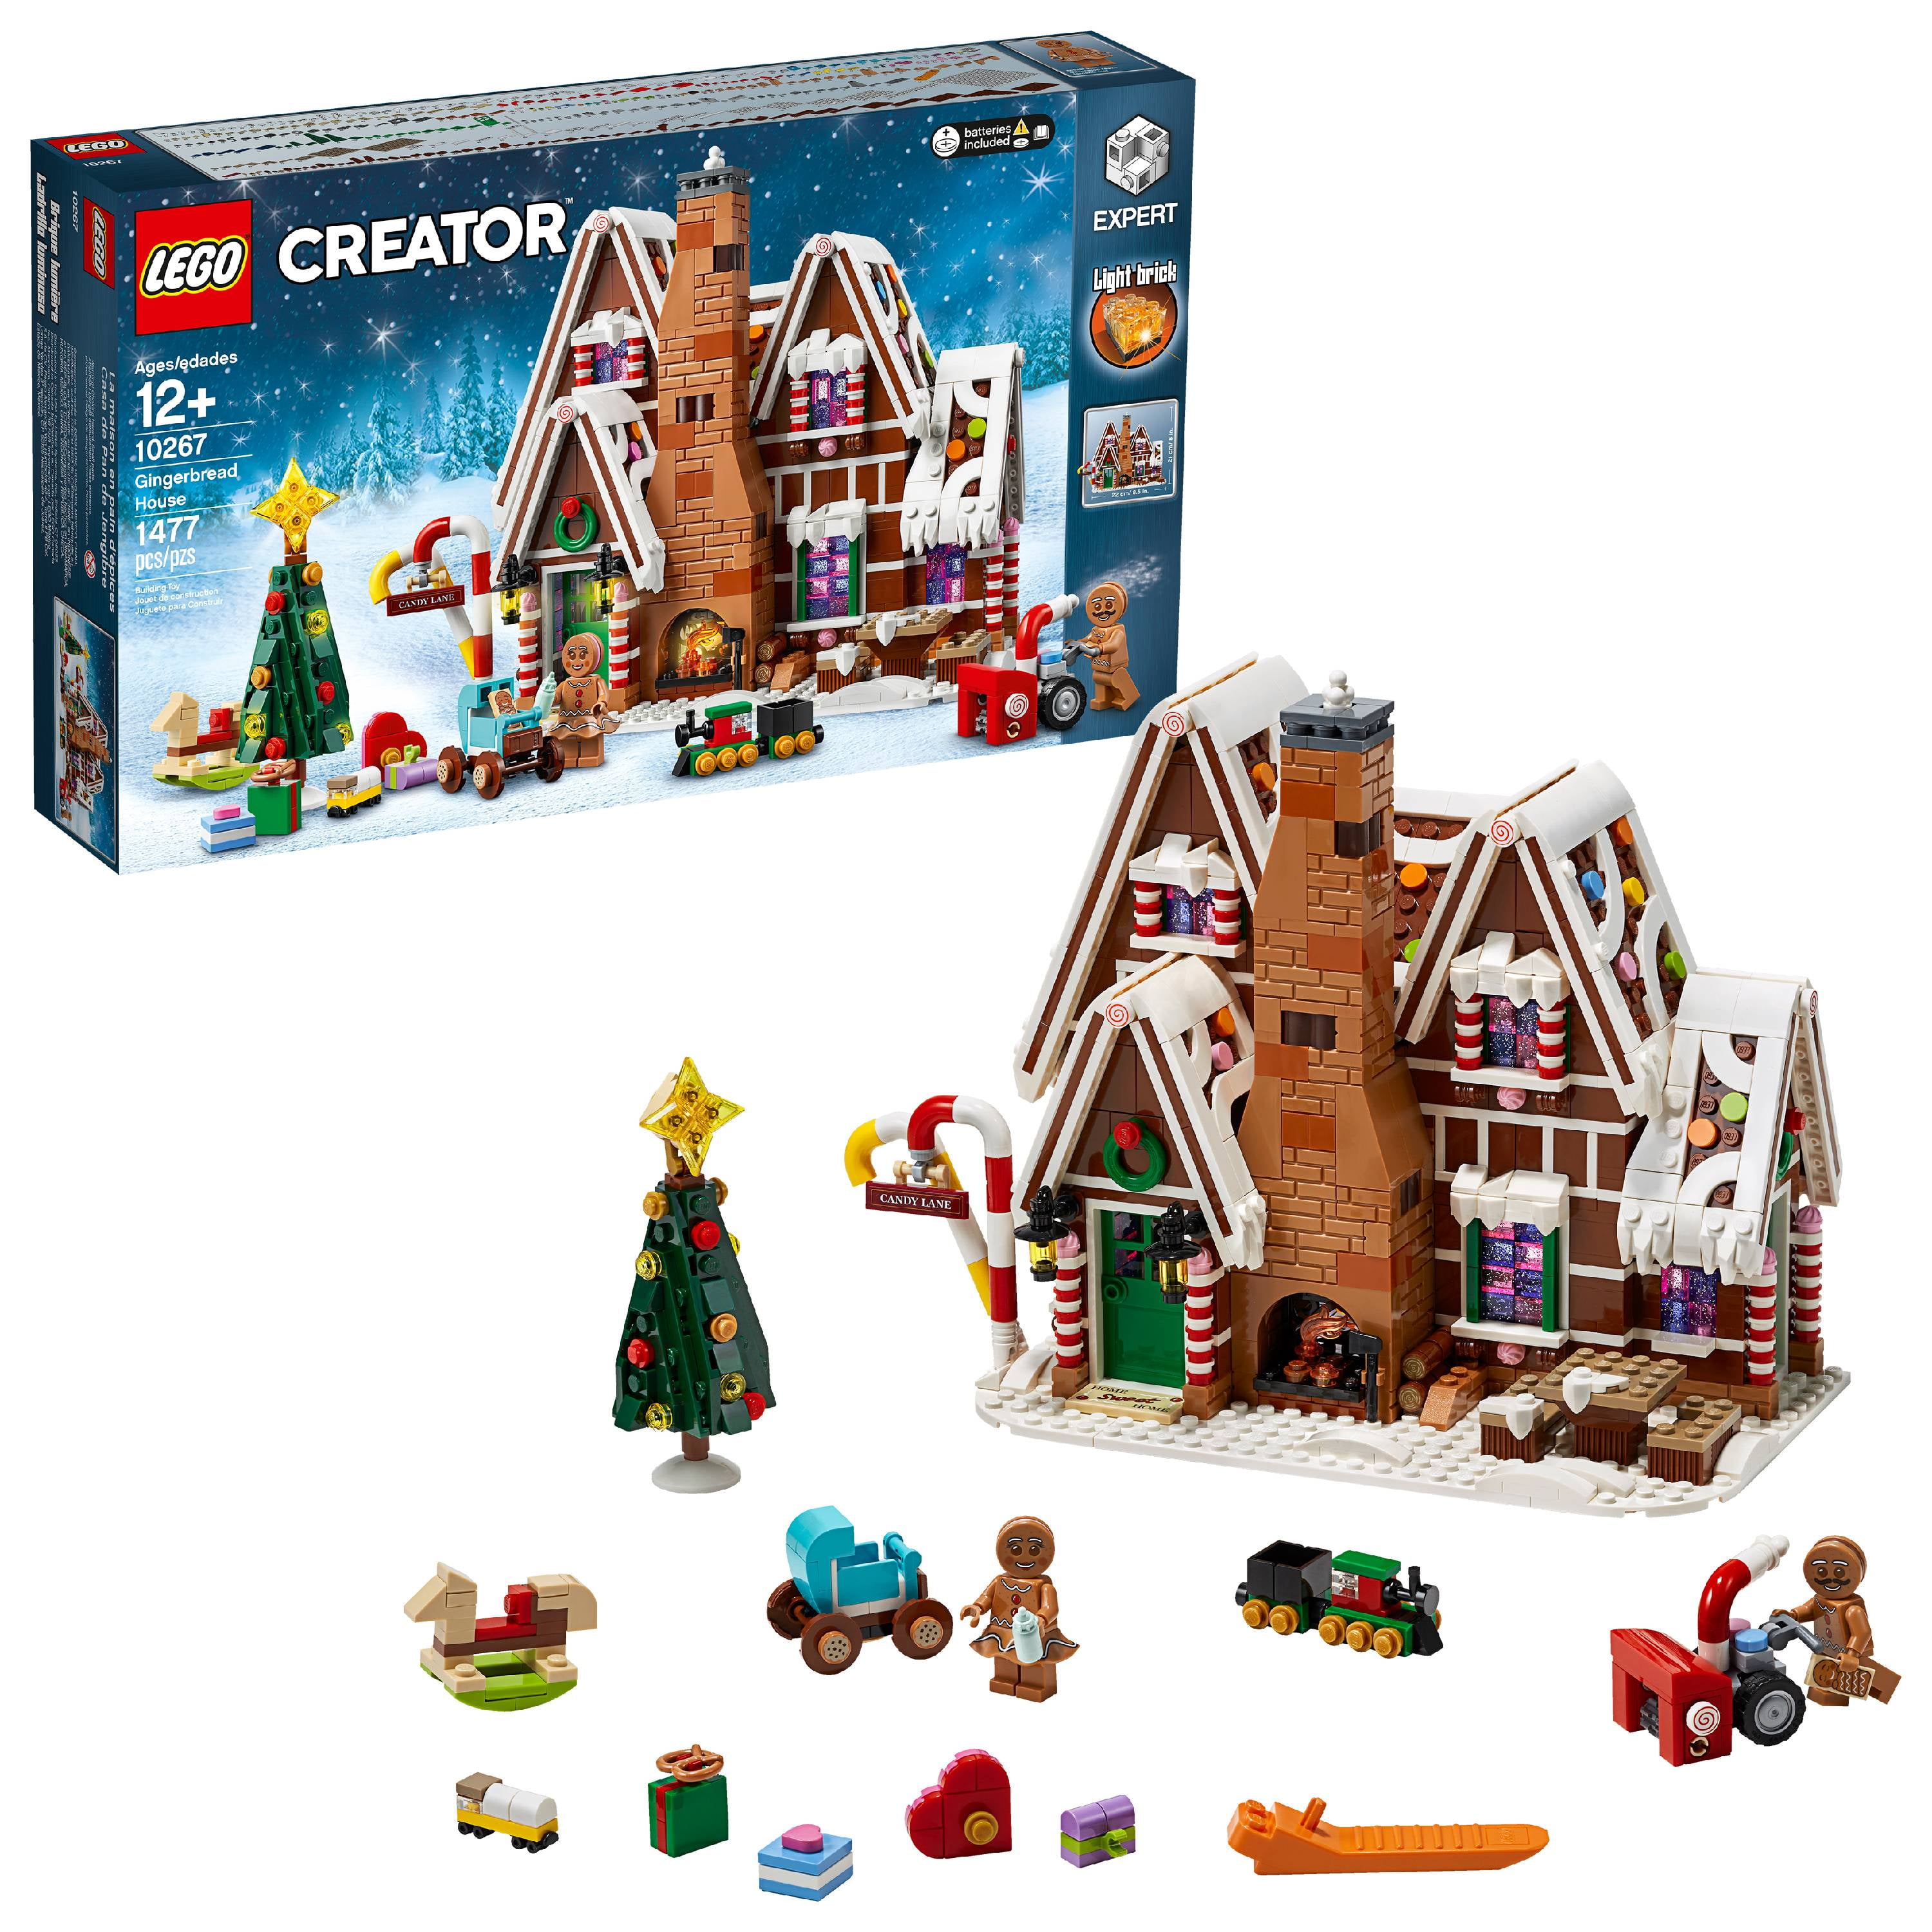 1,477 Pieces LEGO Creator Expert Gingerbread House 10267 Building Kit New 2020 